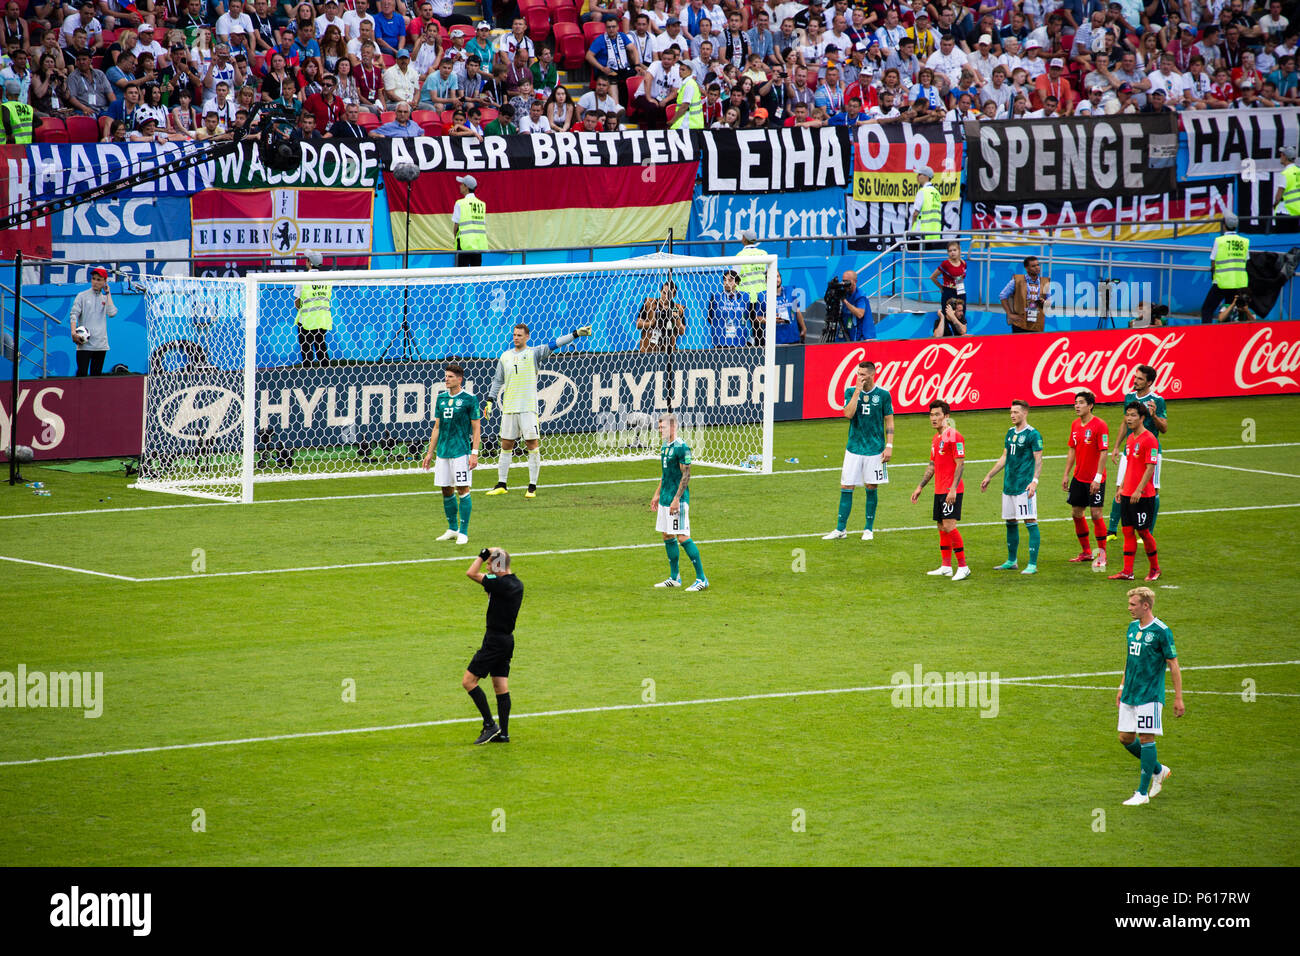 National football team of Korea Republic defeats Germany at the World Cup Russia 2018 in Kazan Russia. Stock Photo